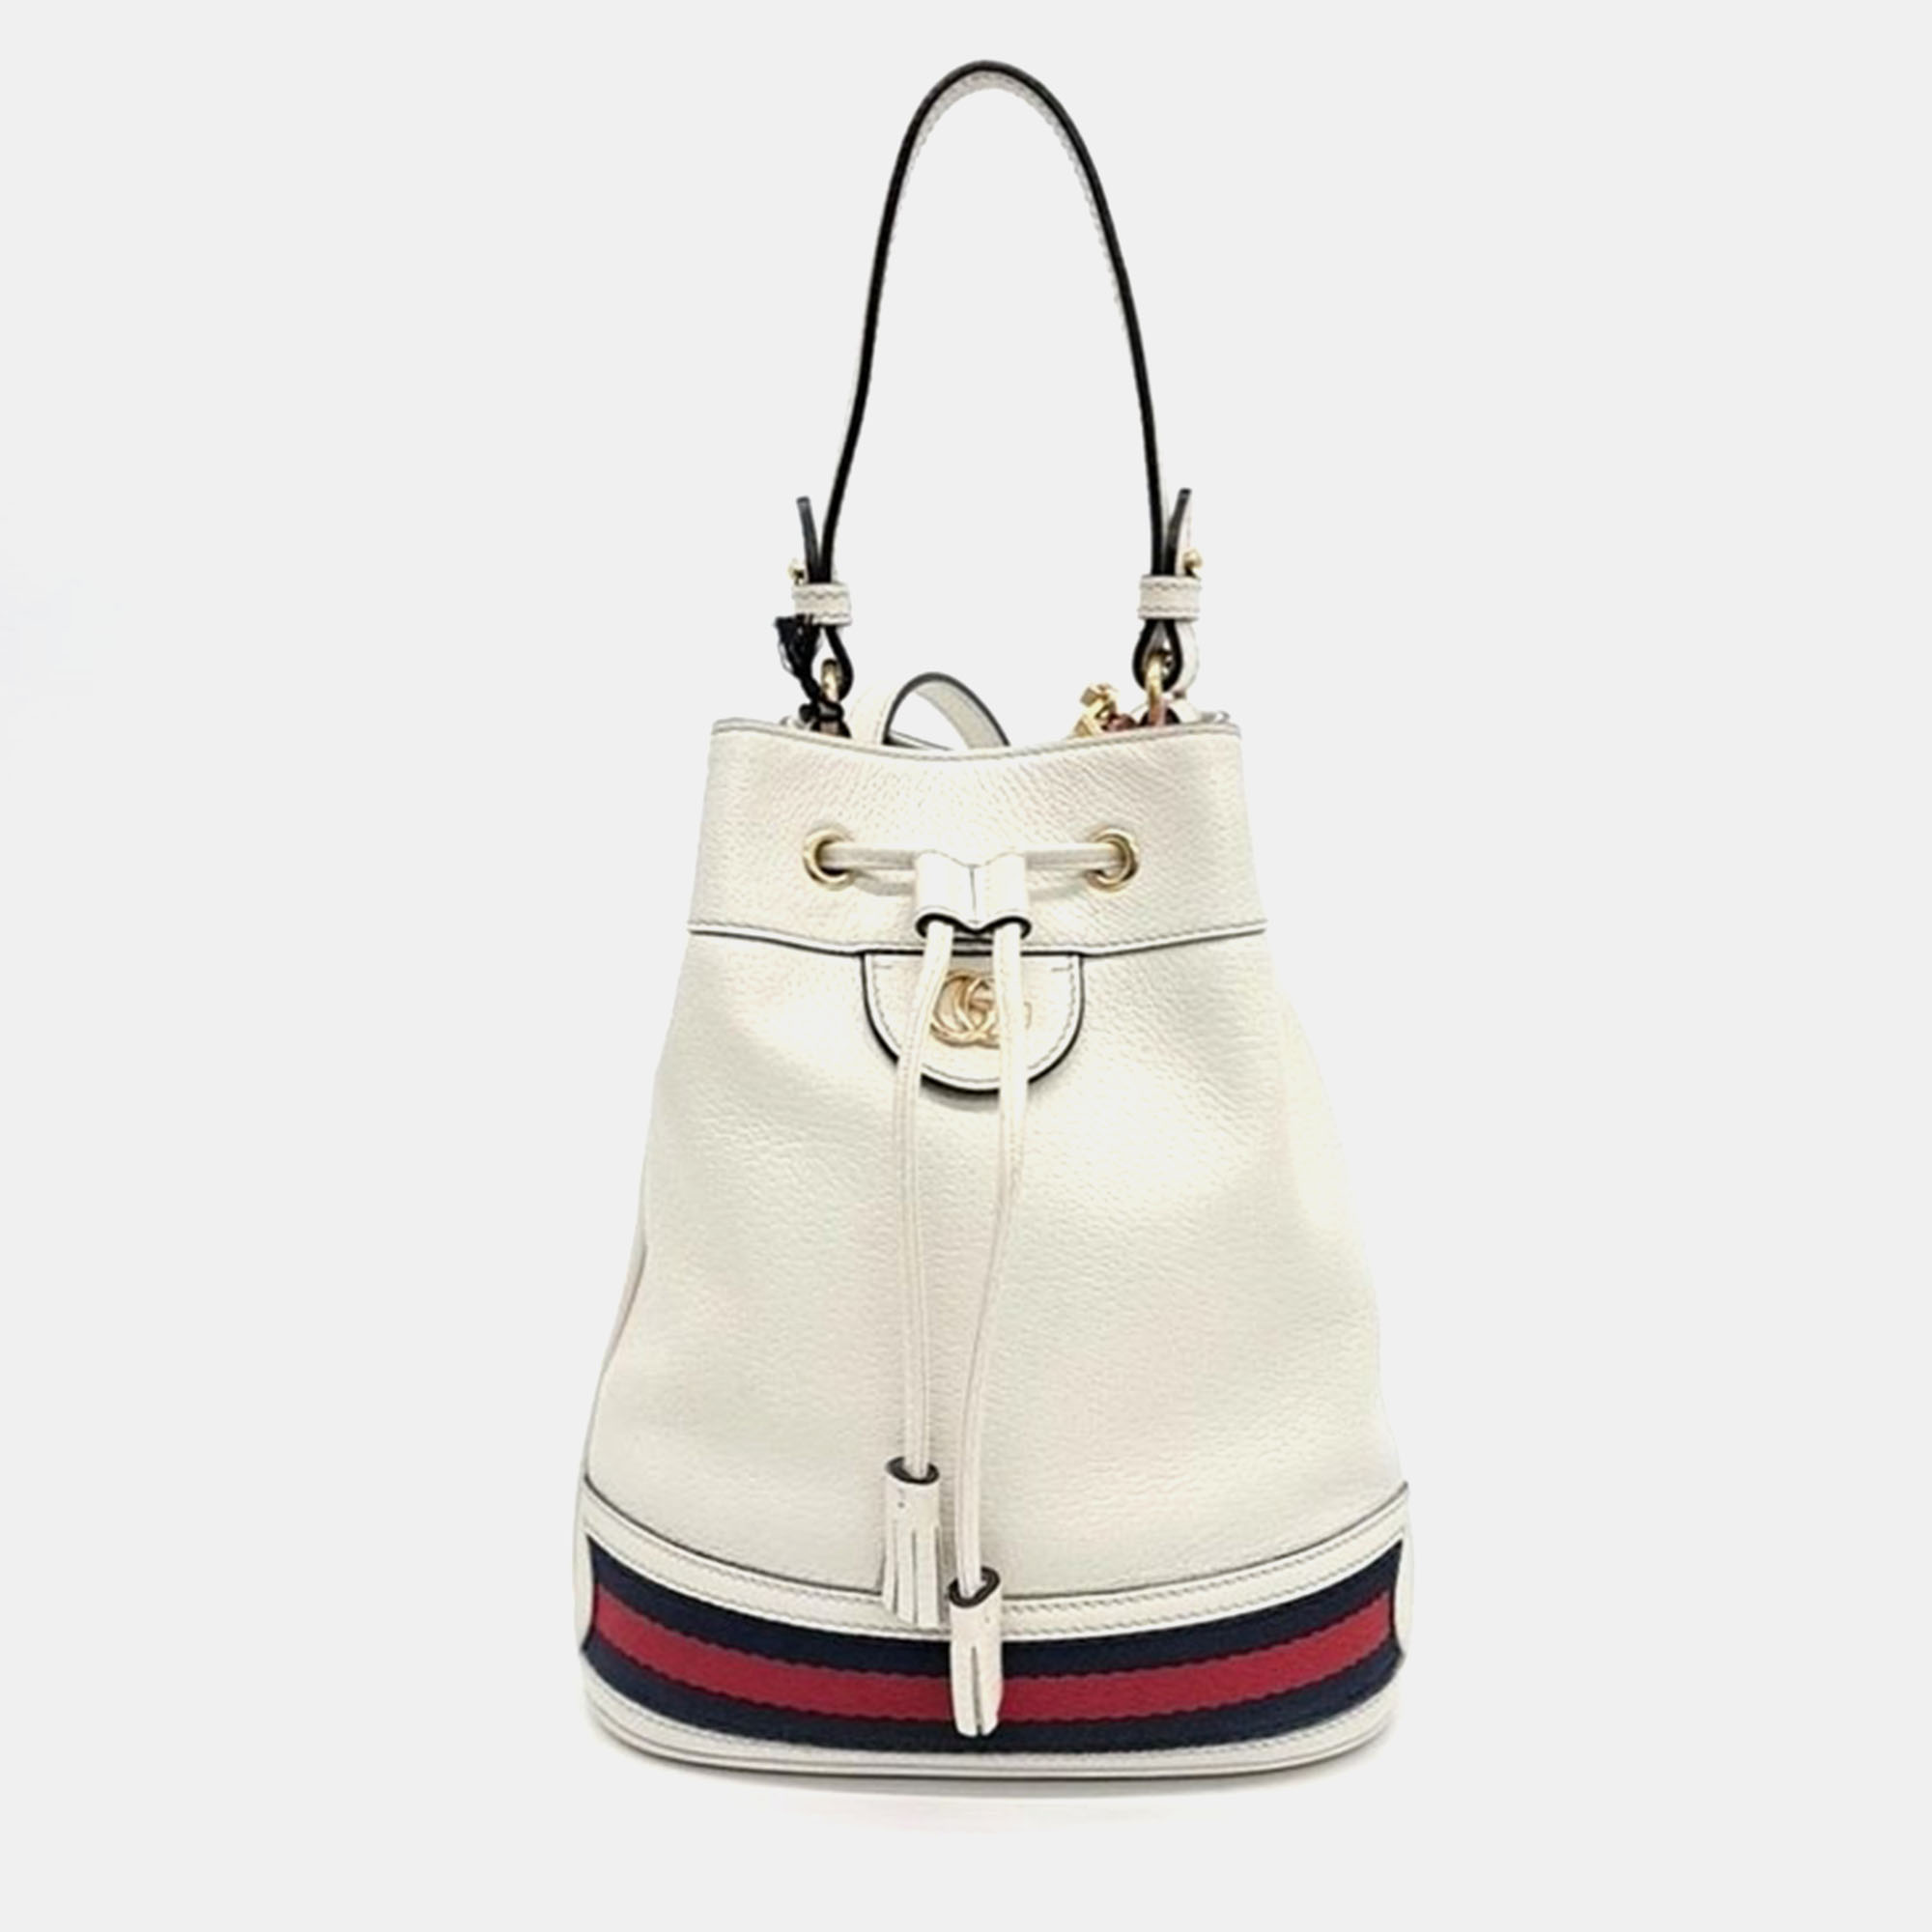 Gucci ophidia small bucket bag